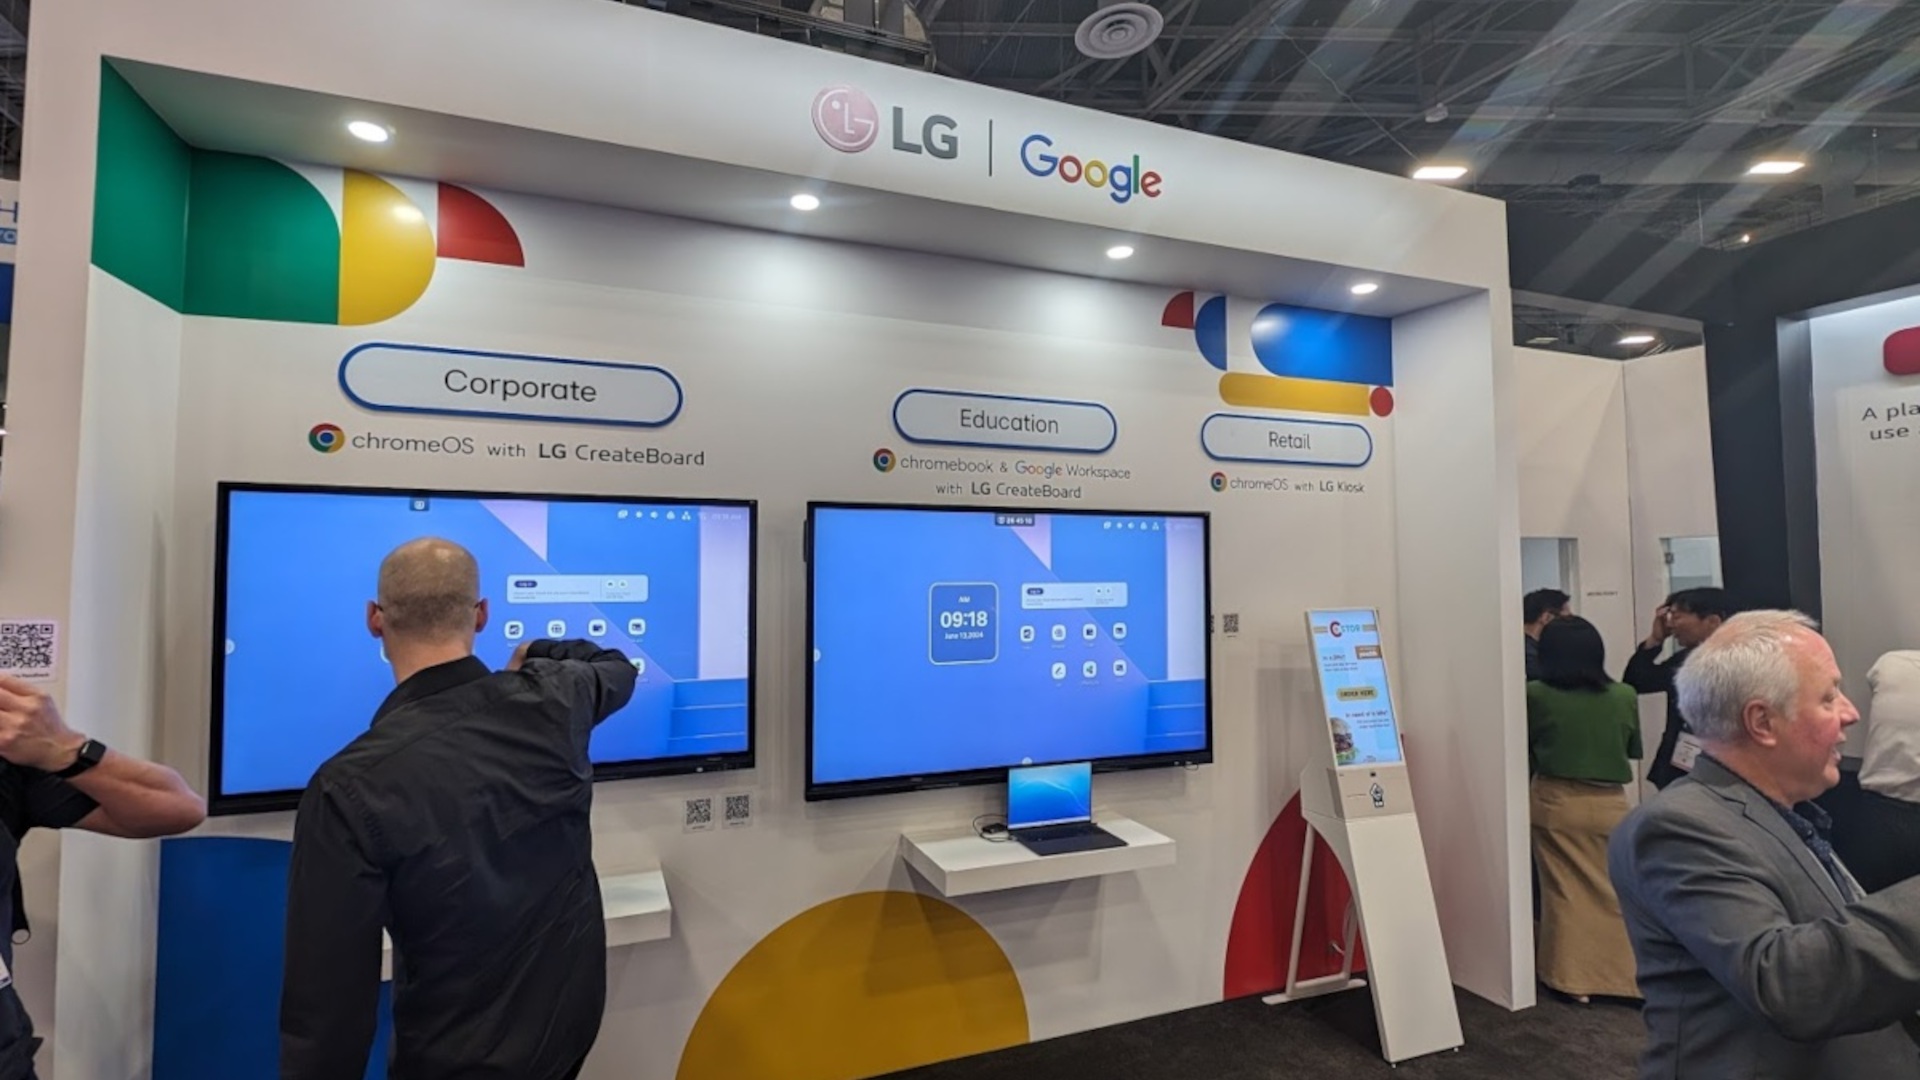 LG and Google launched Chrome OS Devices (image: invidis)